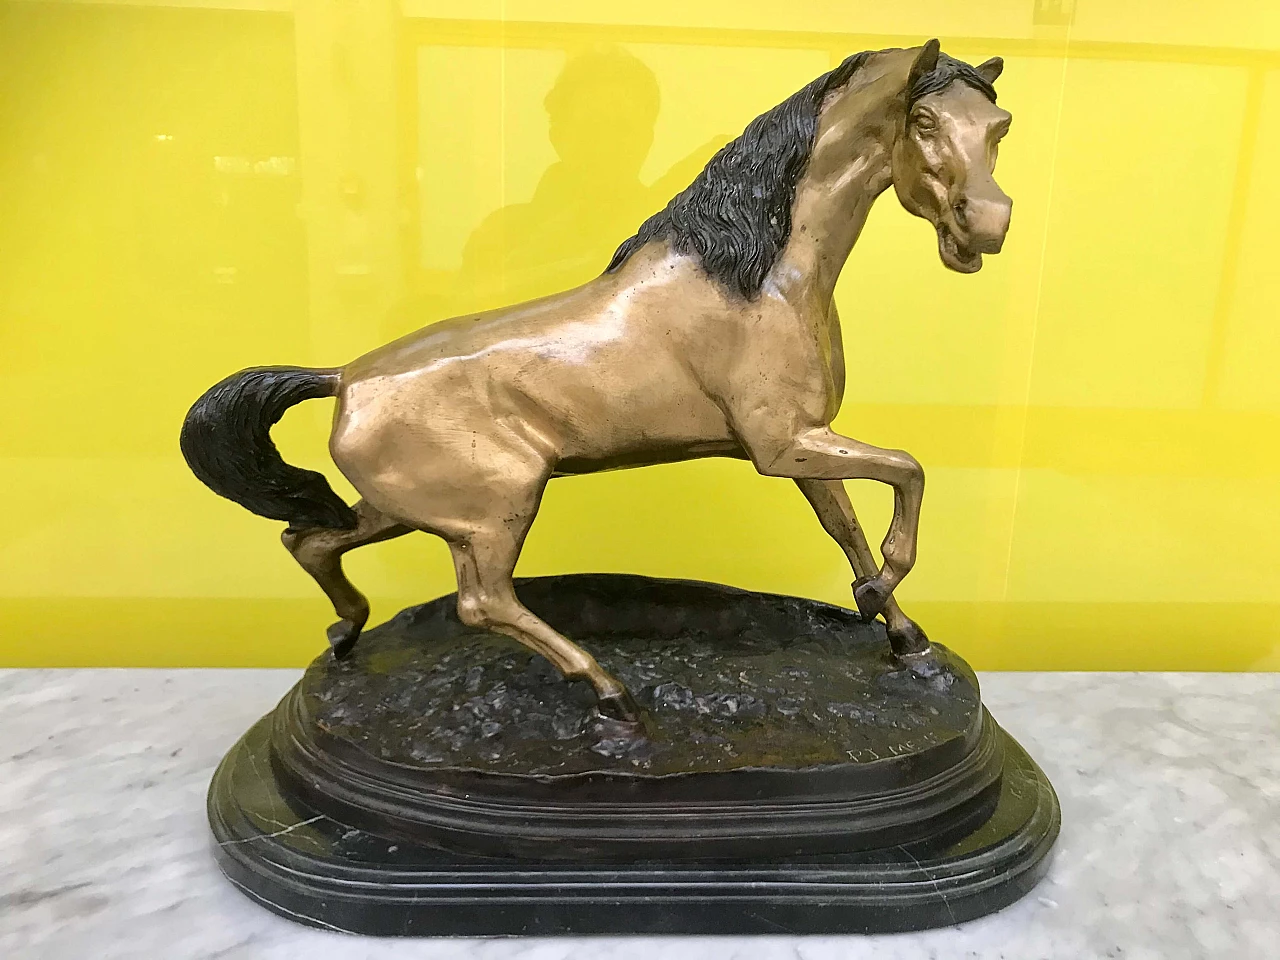 P.J.Mêne, gilded and burnished bronze sculpture of a "Horse" with black marble base, original 19th century 1177728